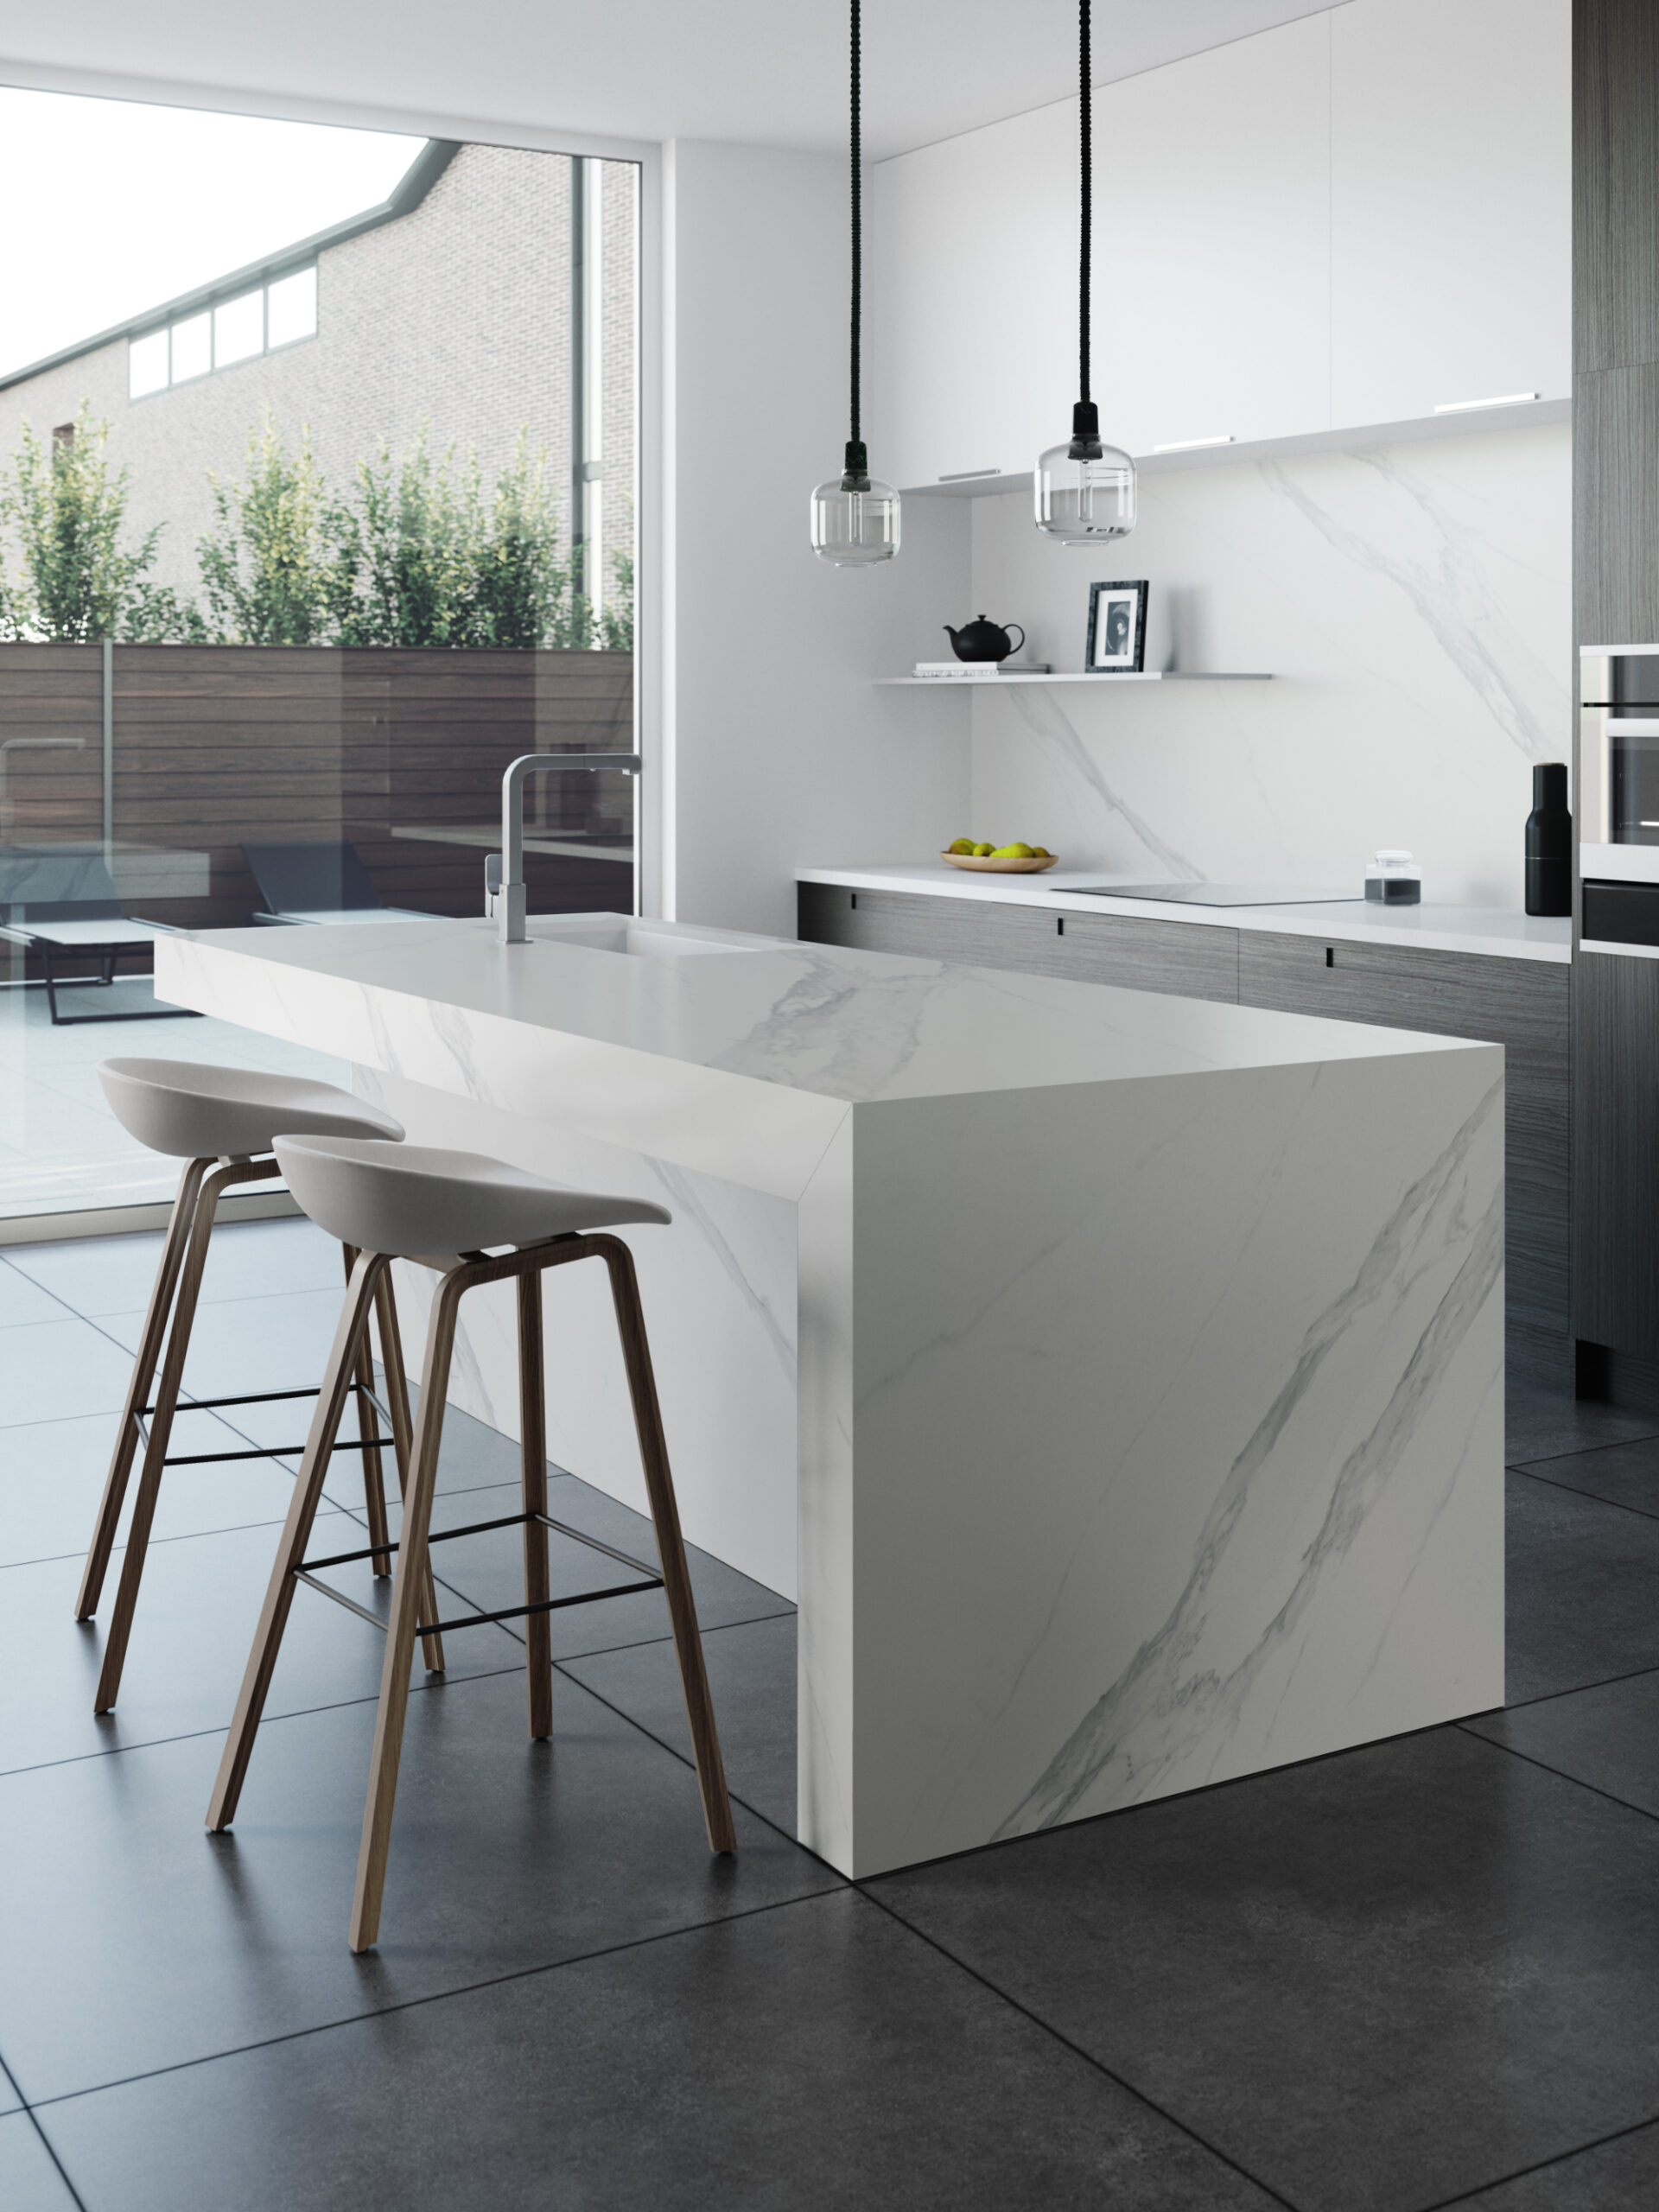 Contemporary kitchen design showing an island unit covered with a white and grey marble effect Dekton® worktop.